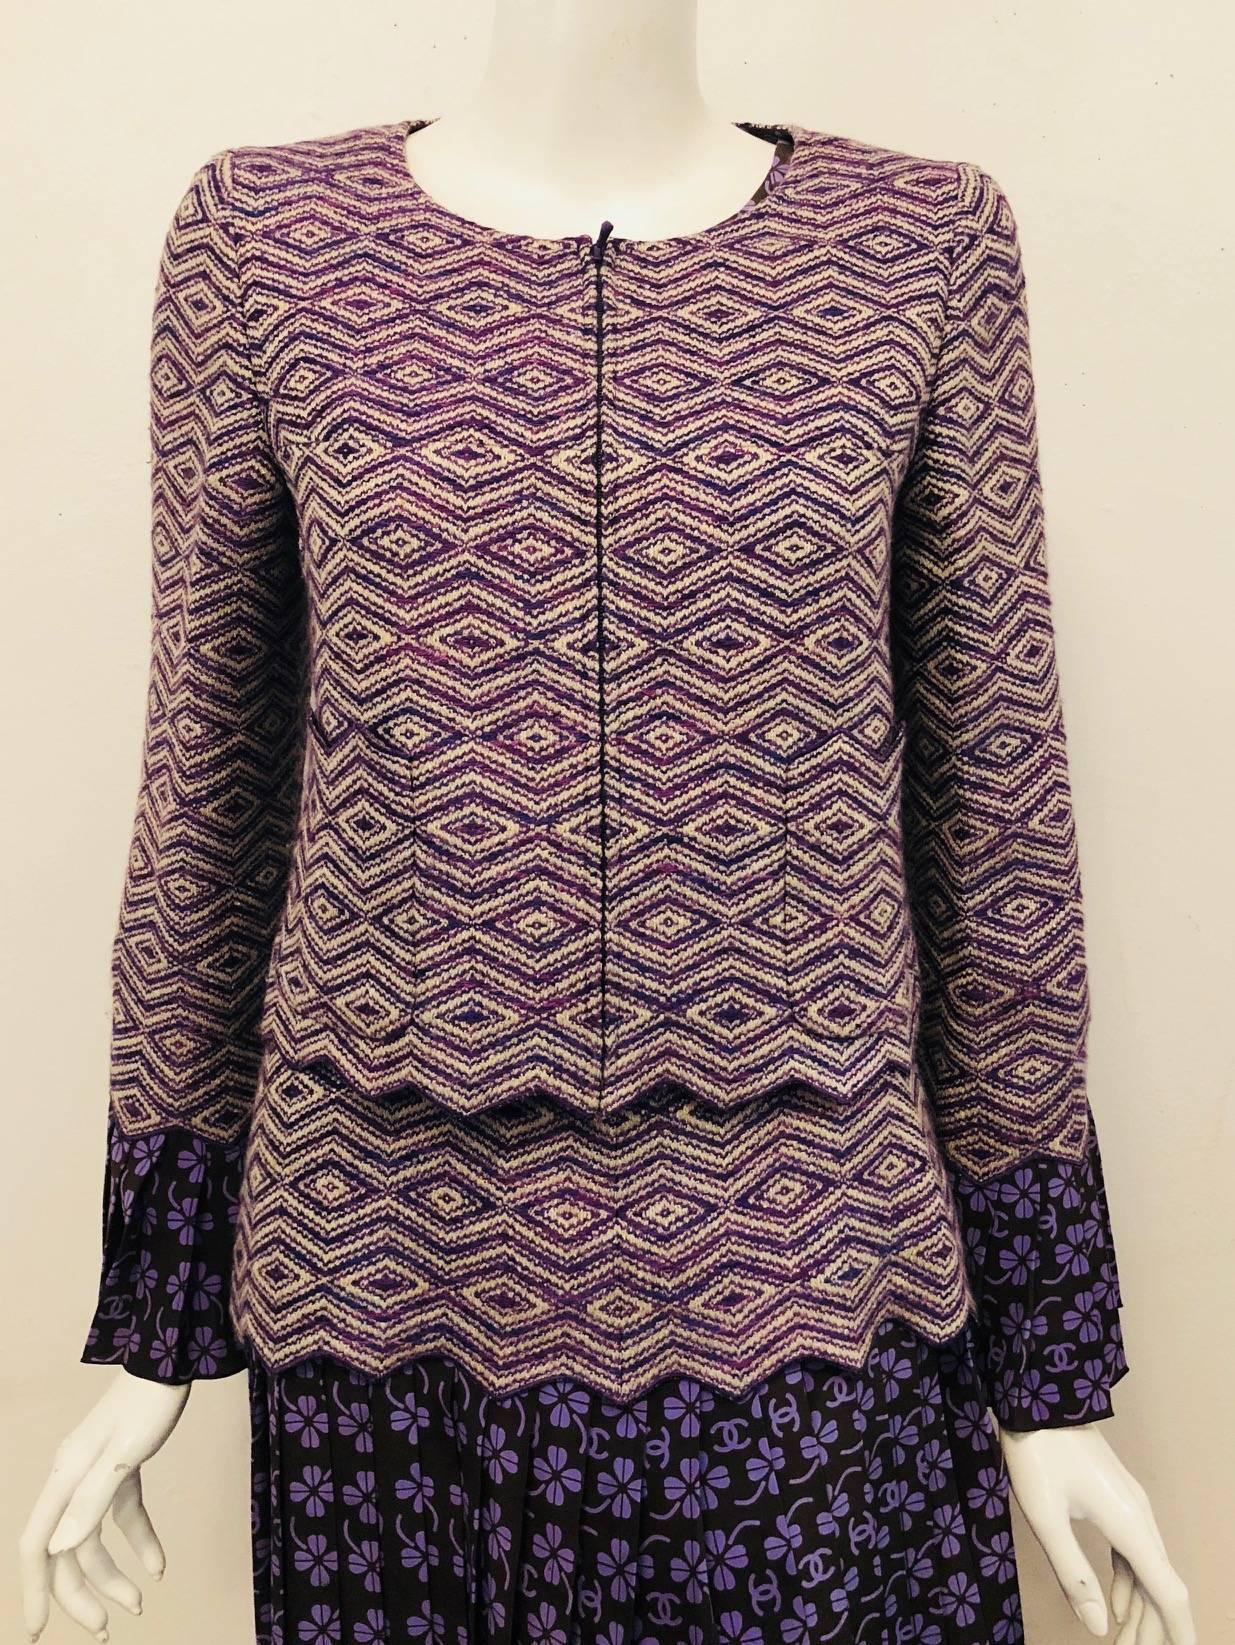 Chanel Spring Purple and Chocolate Silk and Rayon Wool Knit Ensemble 38 In Excellent Condition For Sale In Palm Beach, FL